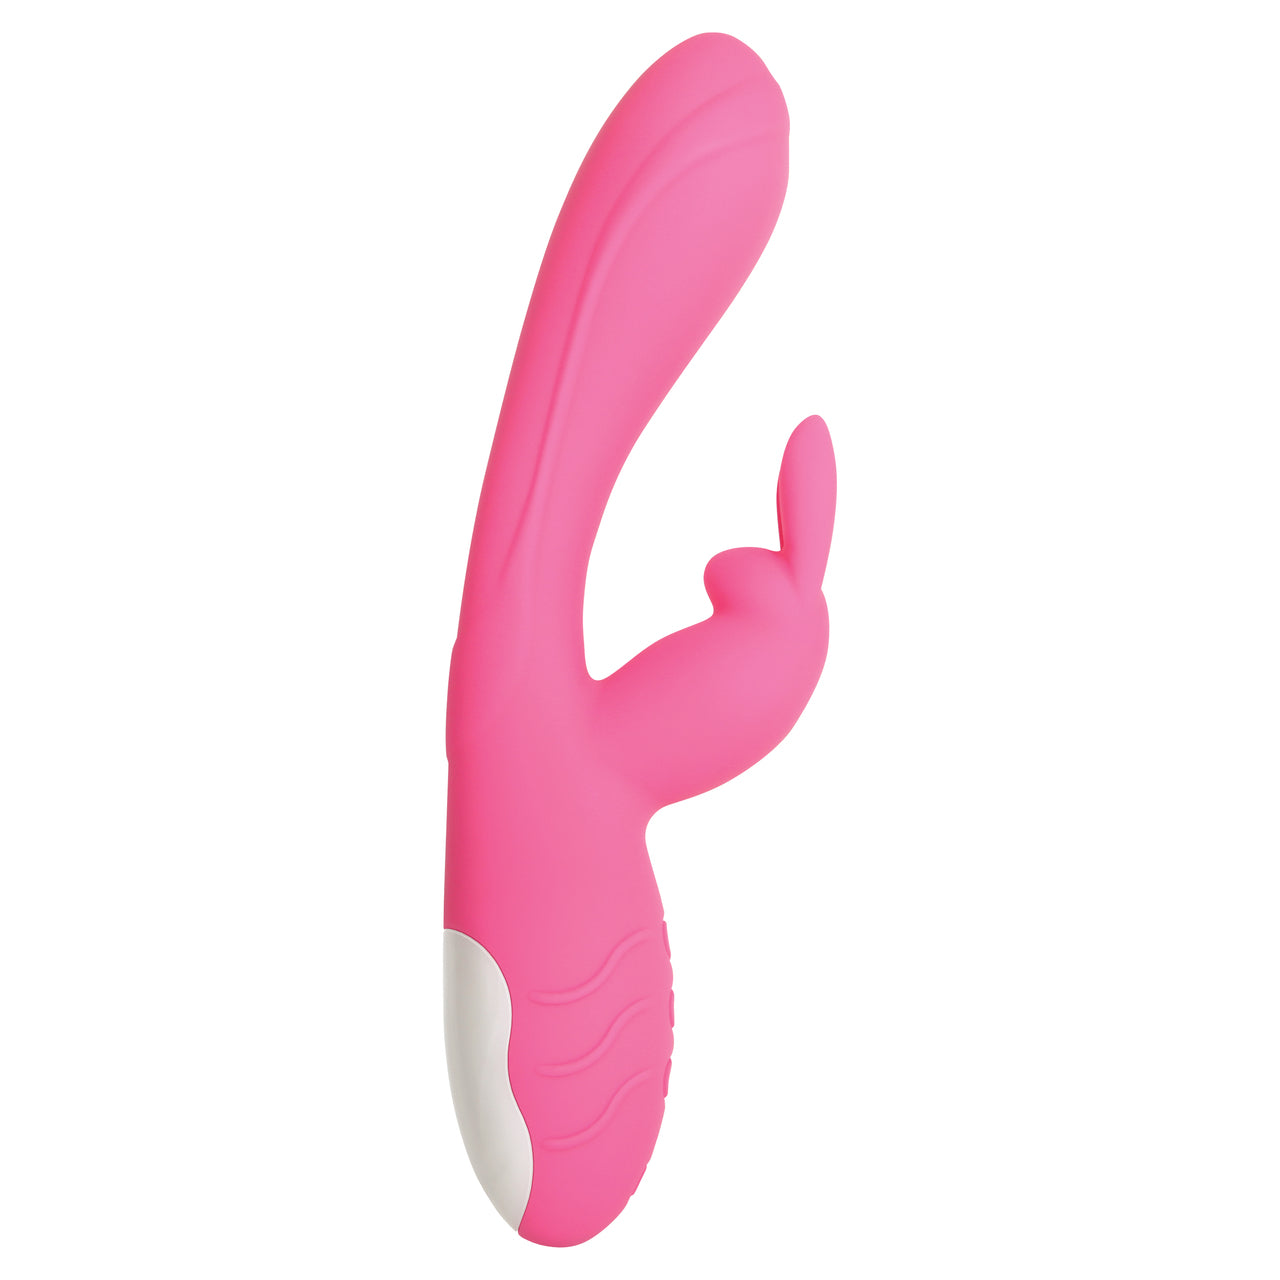 Evolved Bunny Kisses Rechargeable Silicone Vibrator - Pink